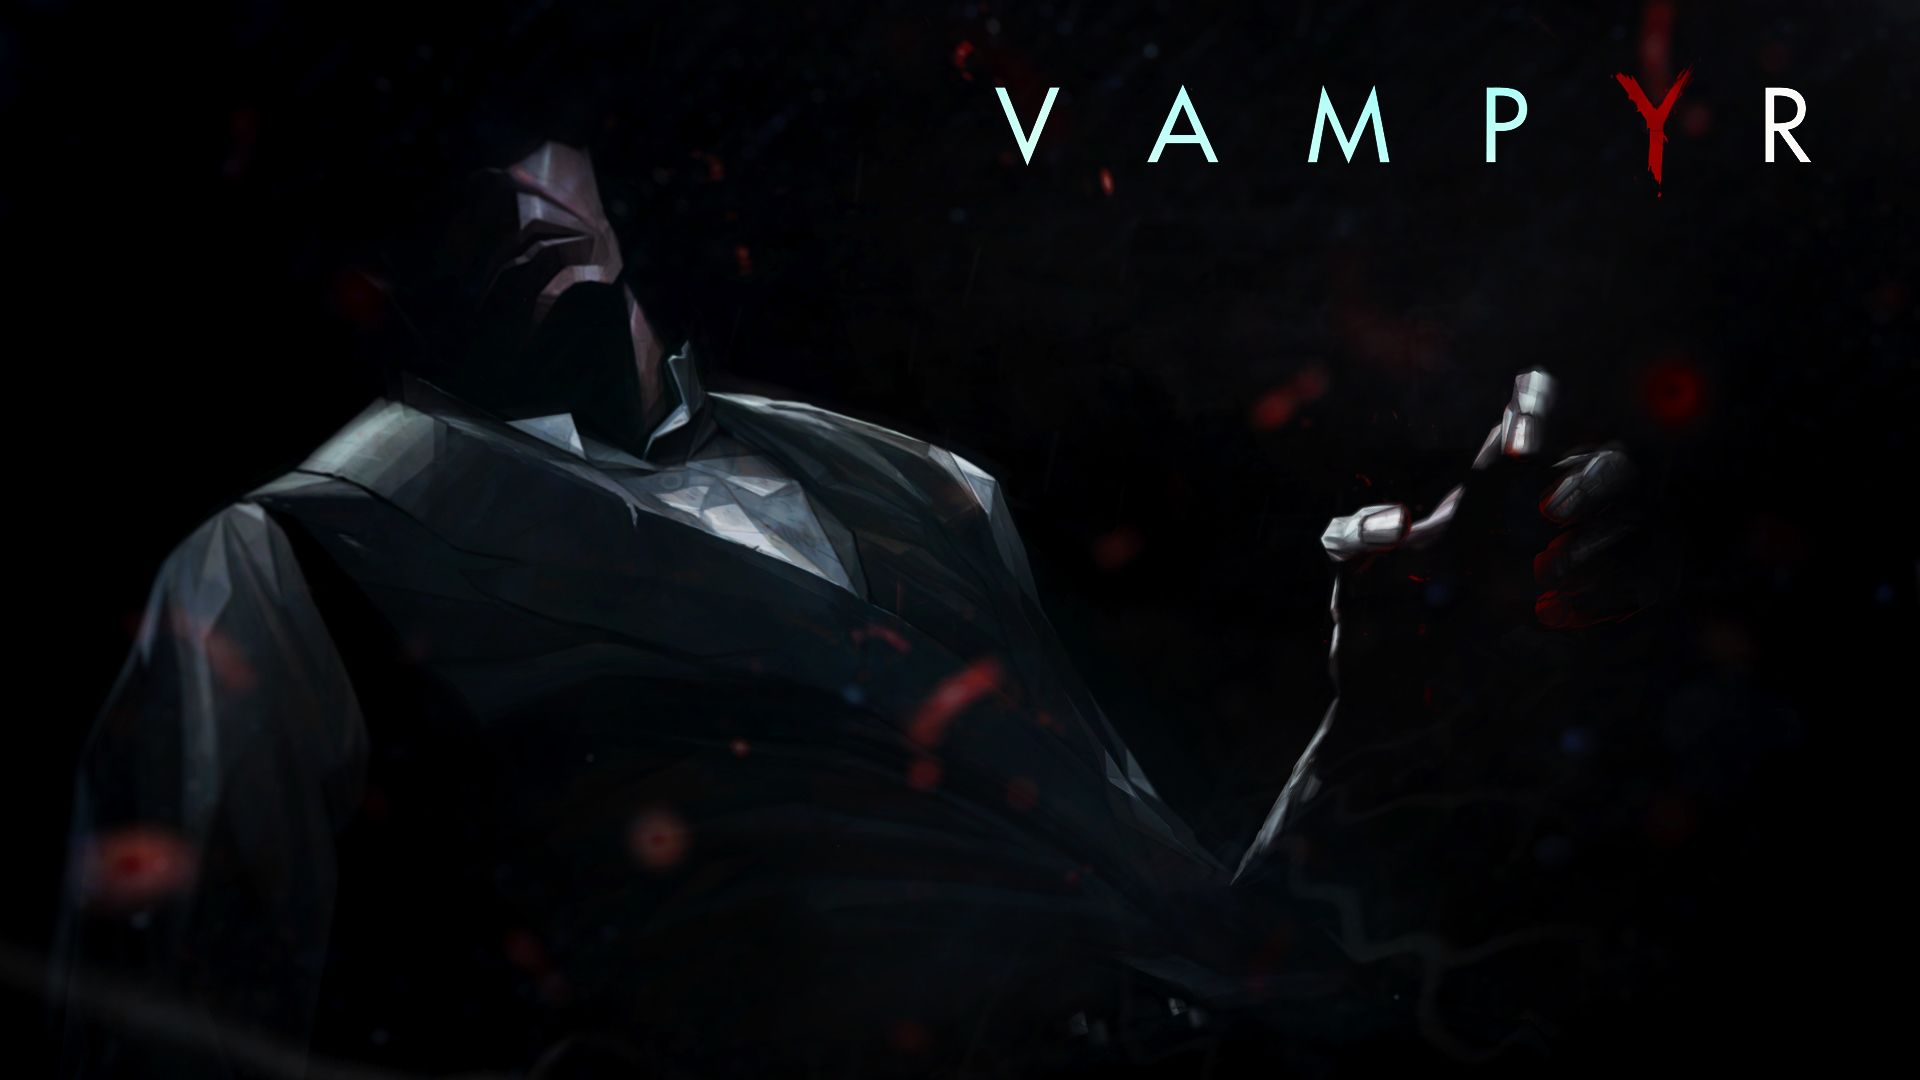 Vampyr Video Game 2018 2048x115220 Resolution Wallpaper, HD Games 4K Wallpaper, Image, Photo and Background